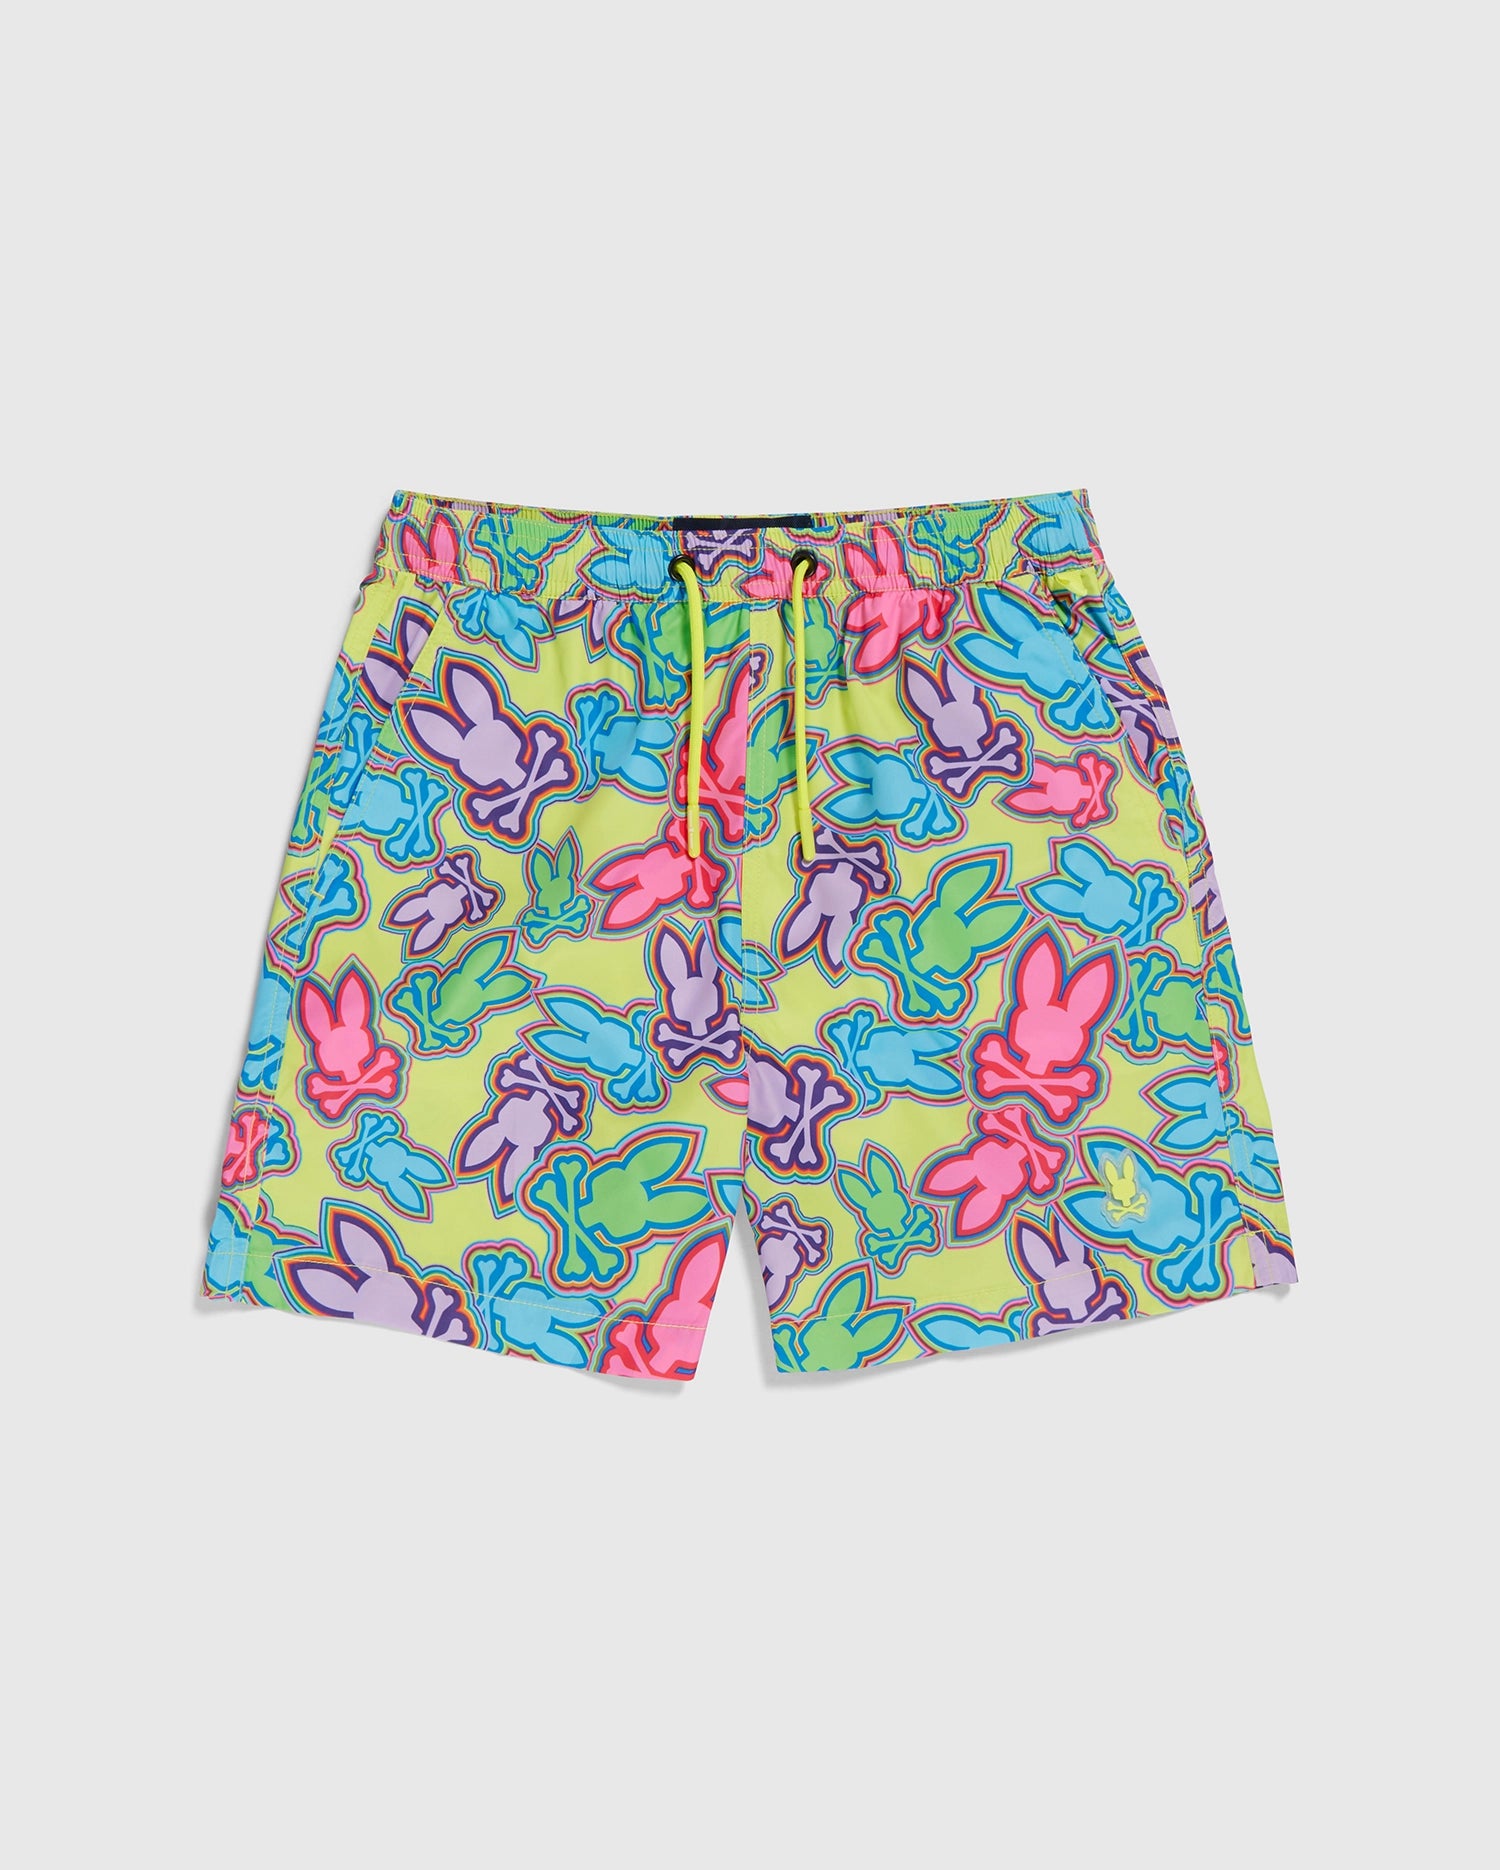 A pair of vibrant Psycho Bunny KIDS MAYBROOK LIGHTWEIGHT SWIM TRUNK - B0W119B2SW featuring a playful, colorful design of overlapping frogs in neon shades of pink, blue, purple, and green on a lime green background. Made from recycled polyester, the shorts have an elastic waistband with a yellow drawstring and quick-dry properties.